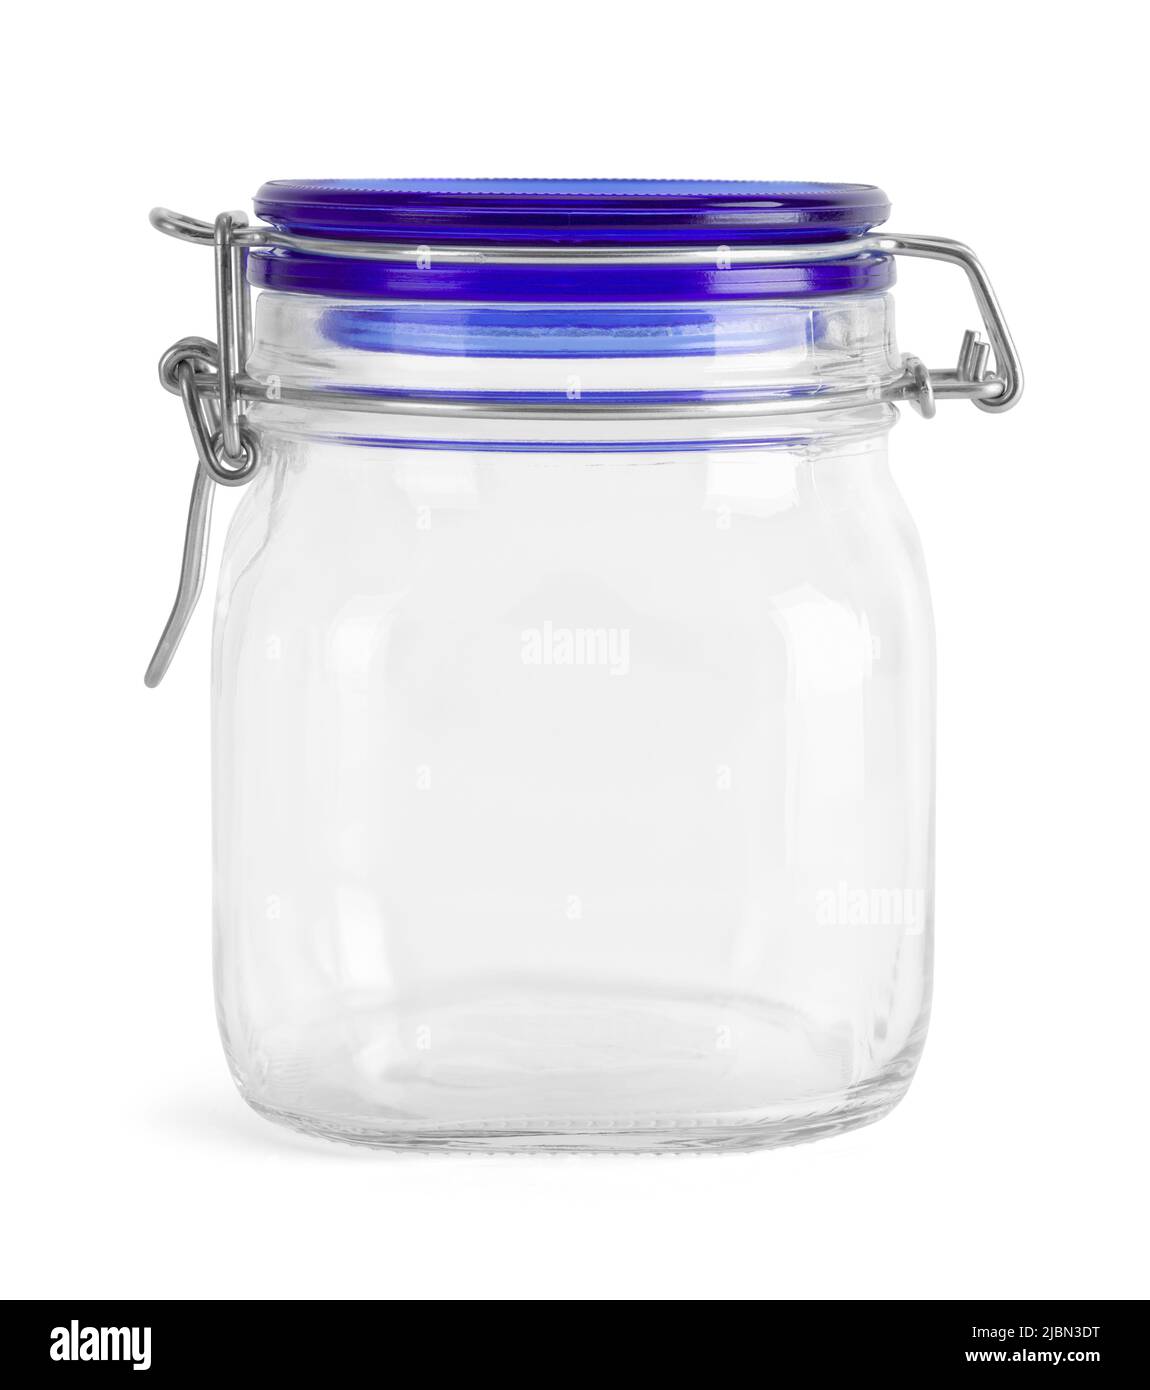 Glass Jar Sealed Lid Cut Out on White. Stock Photo